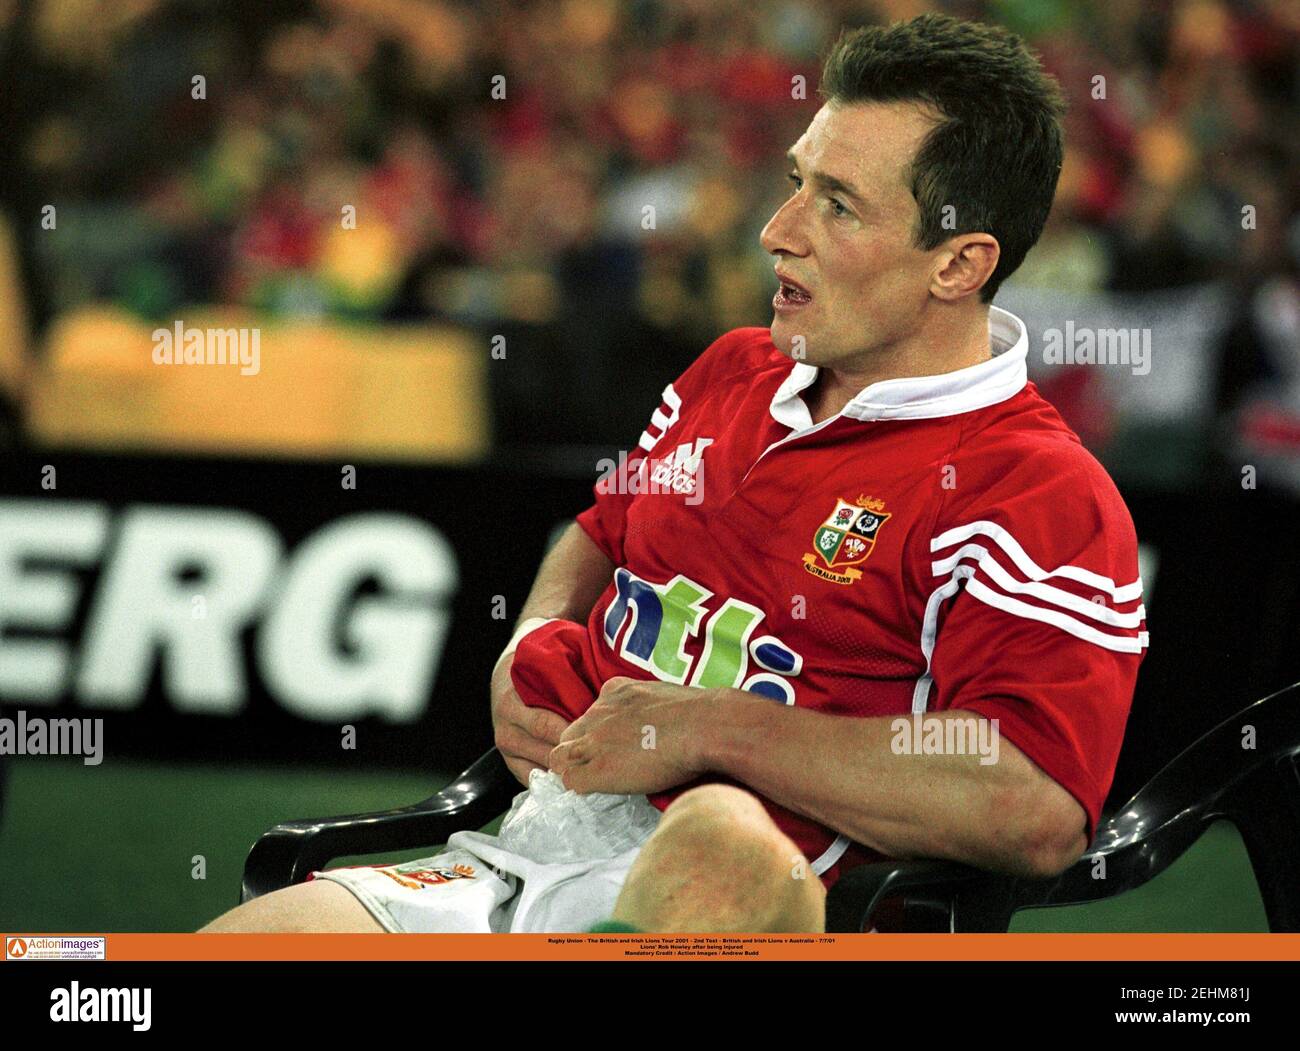 Rugby Union - The British and Irish Lions Tour 2001 - 2nd Test - British and Irish Lions v Australia - 7/7/01  Lions' Rob Howley after being injured  Mandatory Credit : Action Images / Andrew Budd Stock Photo